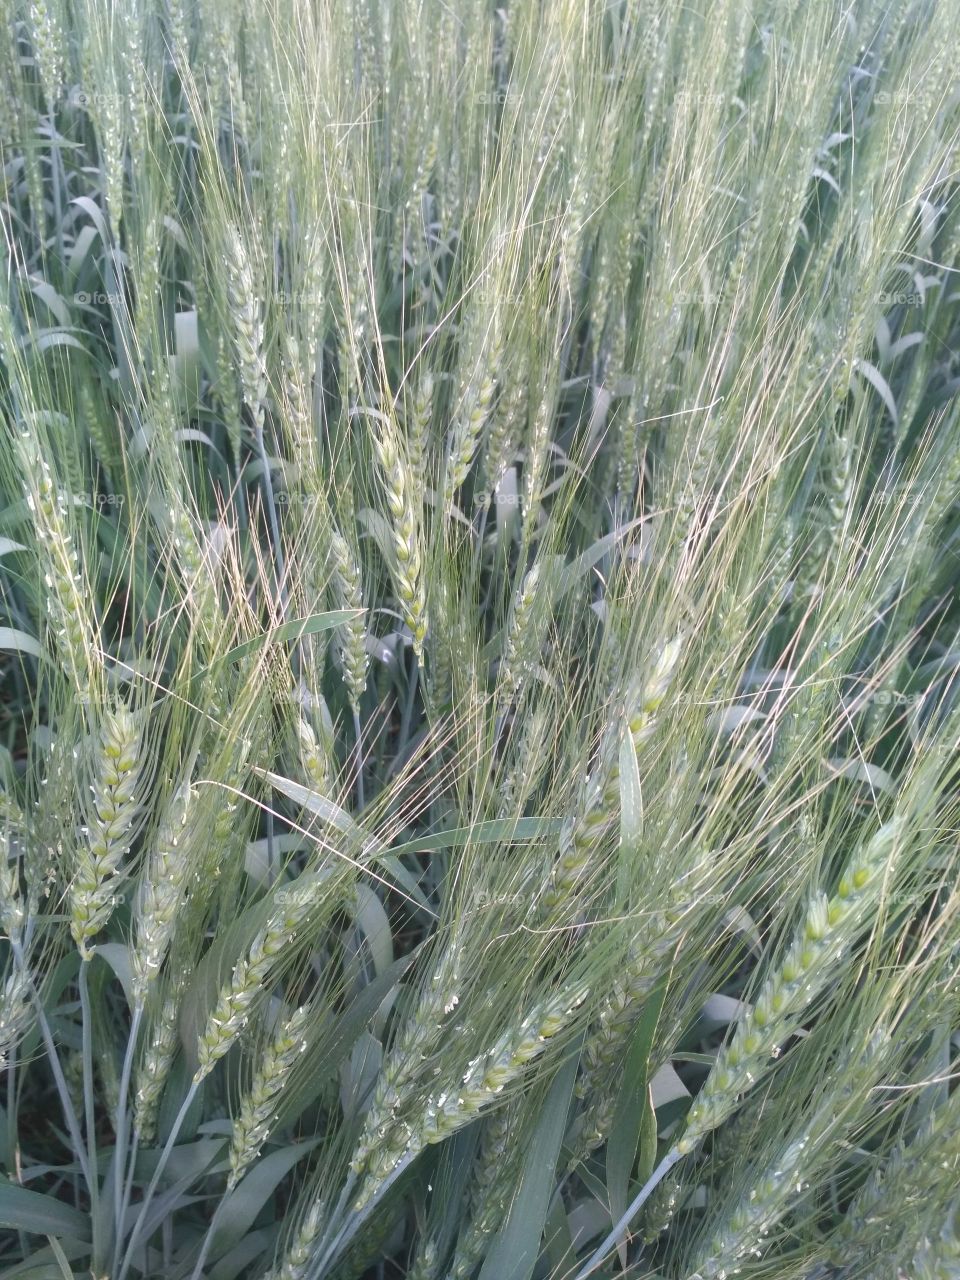 awesome nature of Indian in Gujarat farm of the wheat very usable for Gujarati people and healthy roti make it..